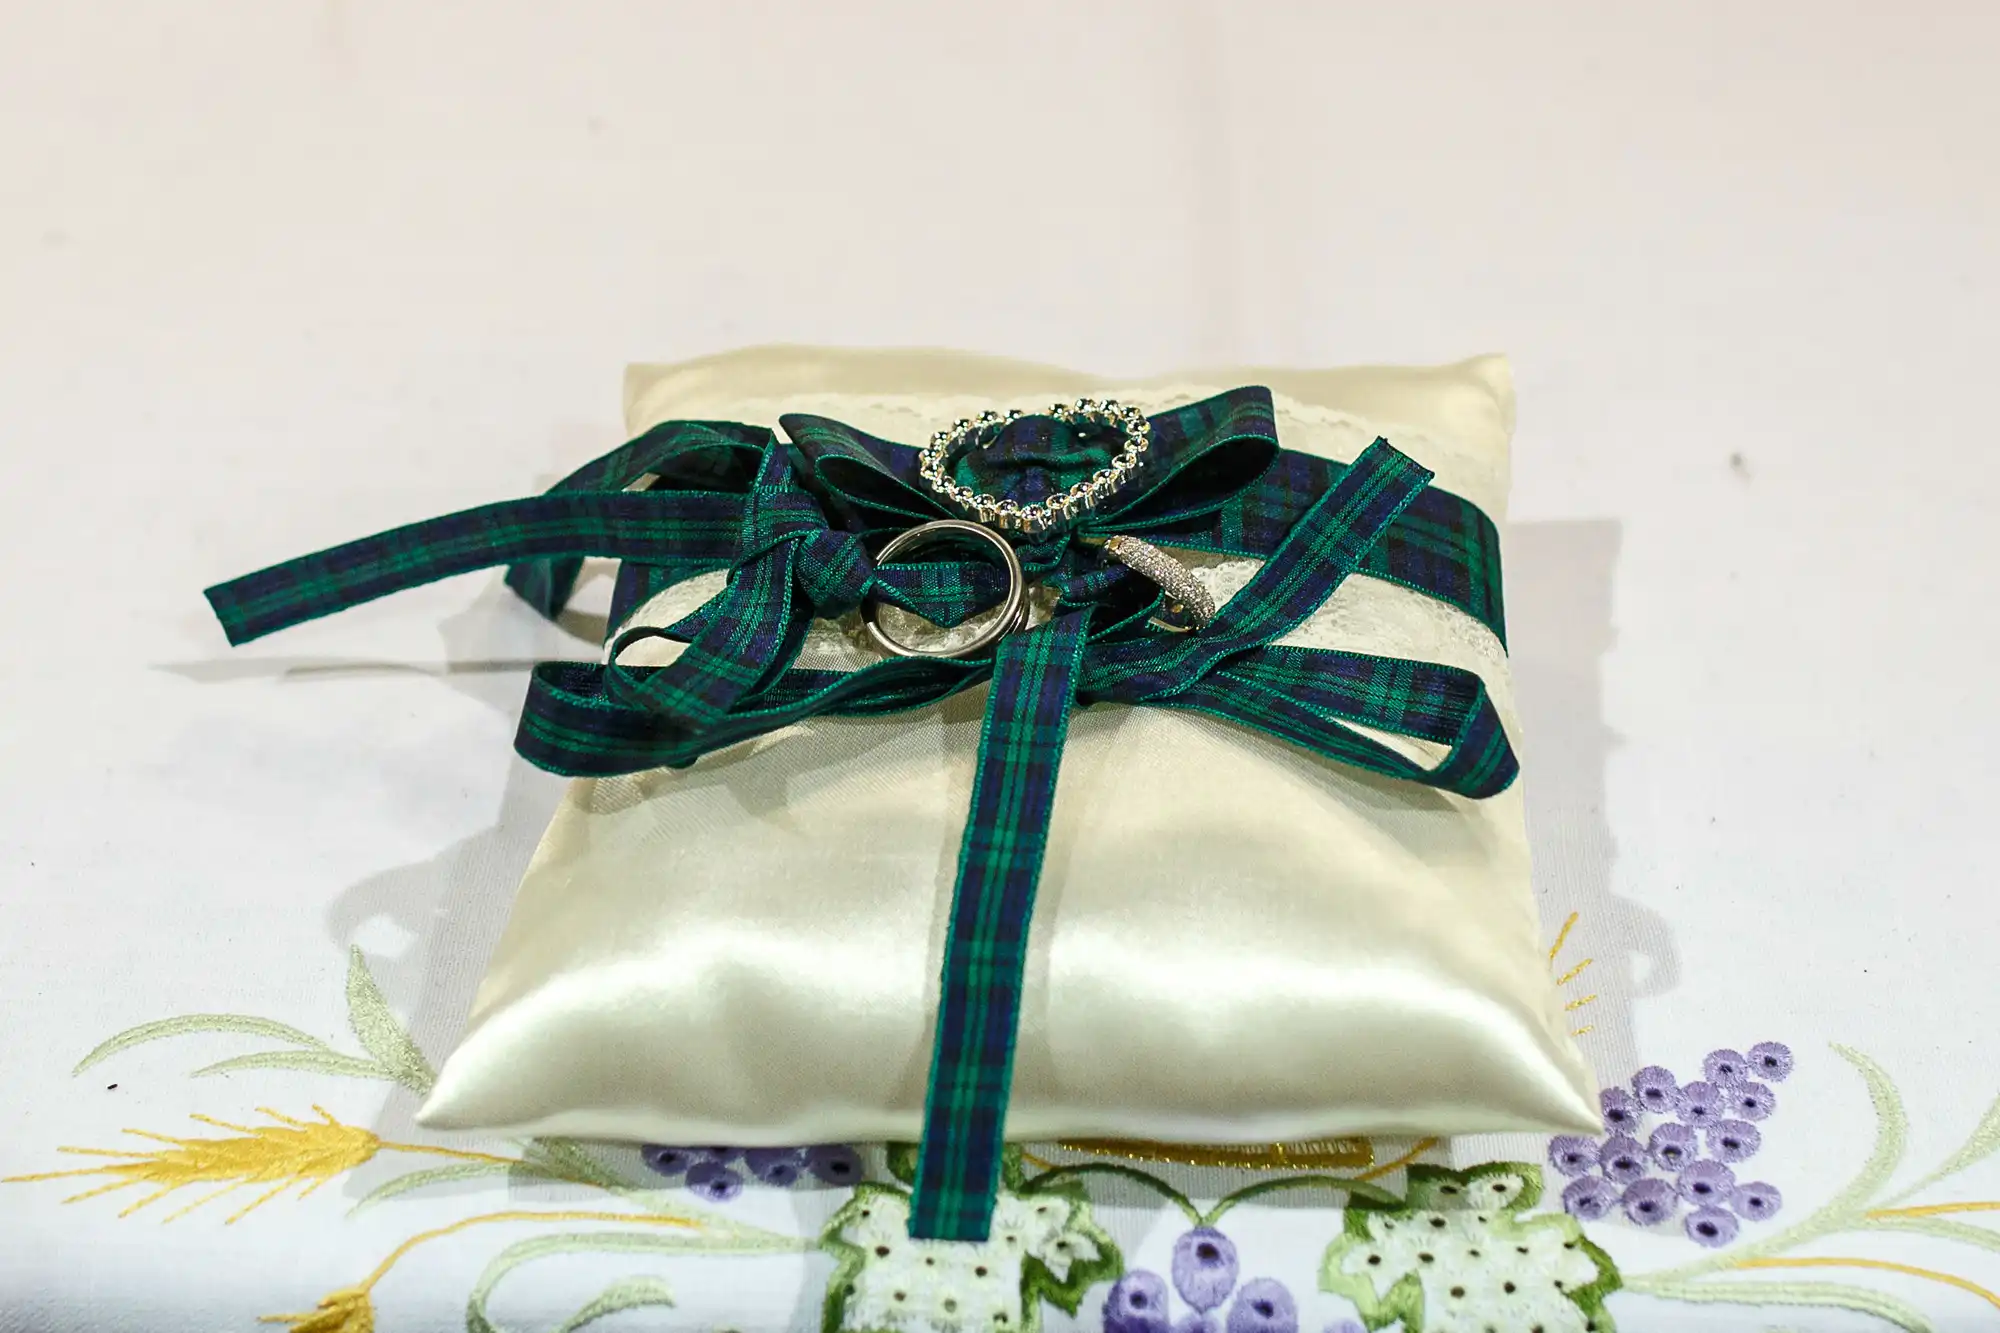 A satin ivory pillow adorned with a tartan ribbon and a sparkling brooch, typically used for holding rings at a wedding ceremony.